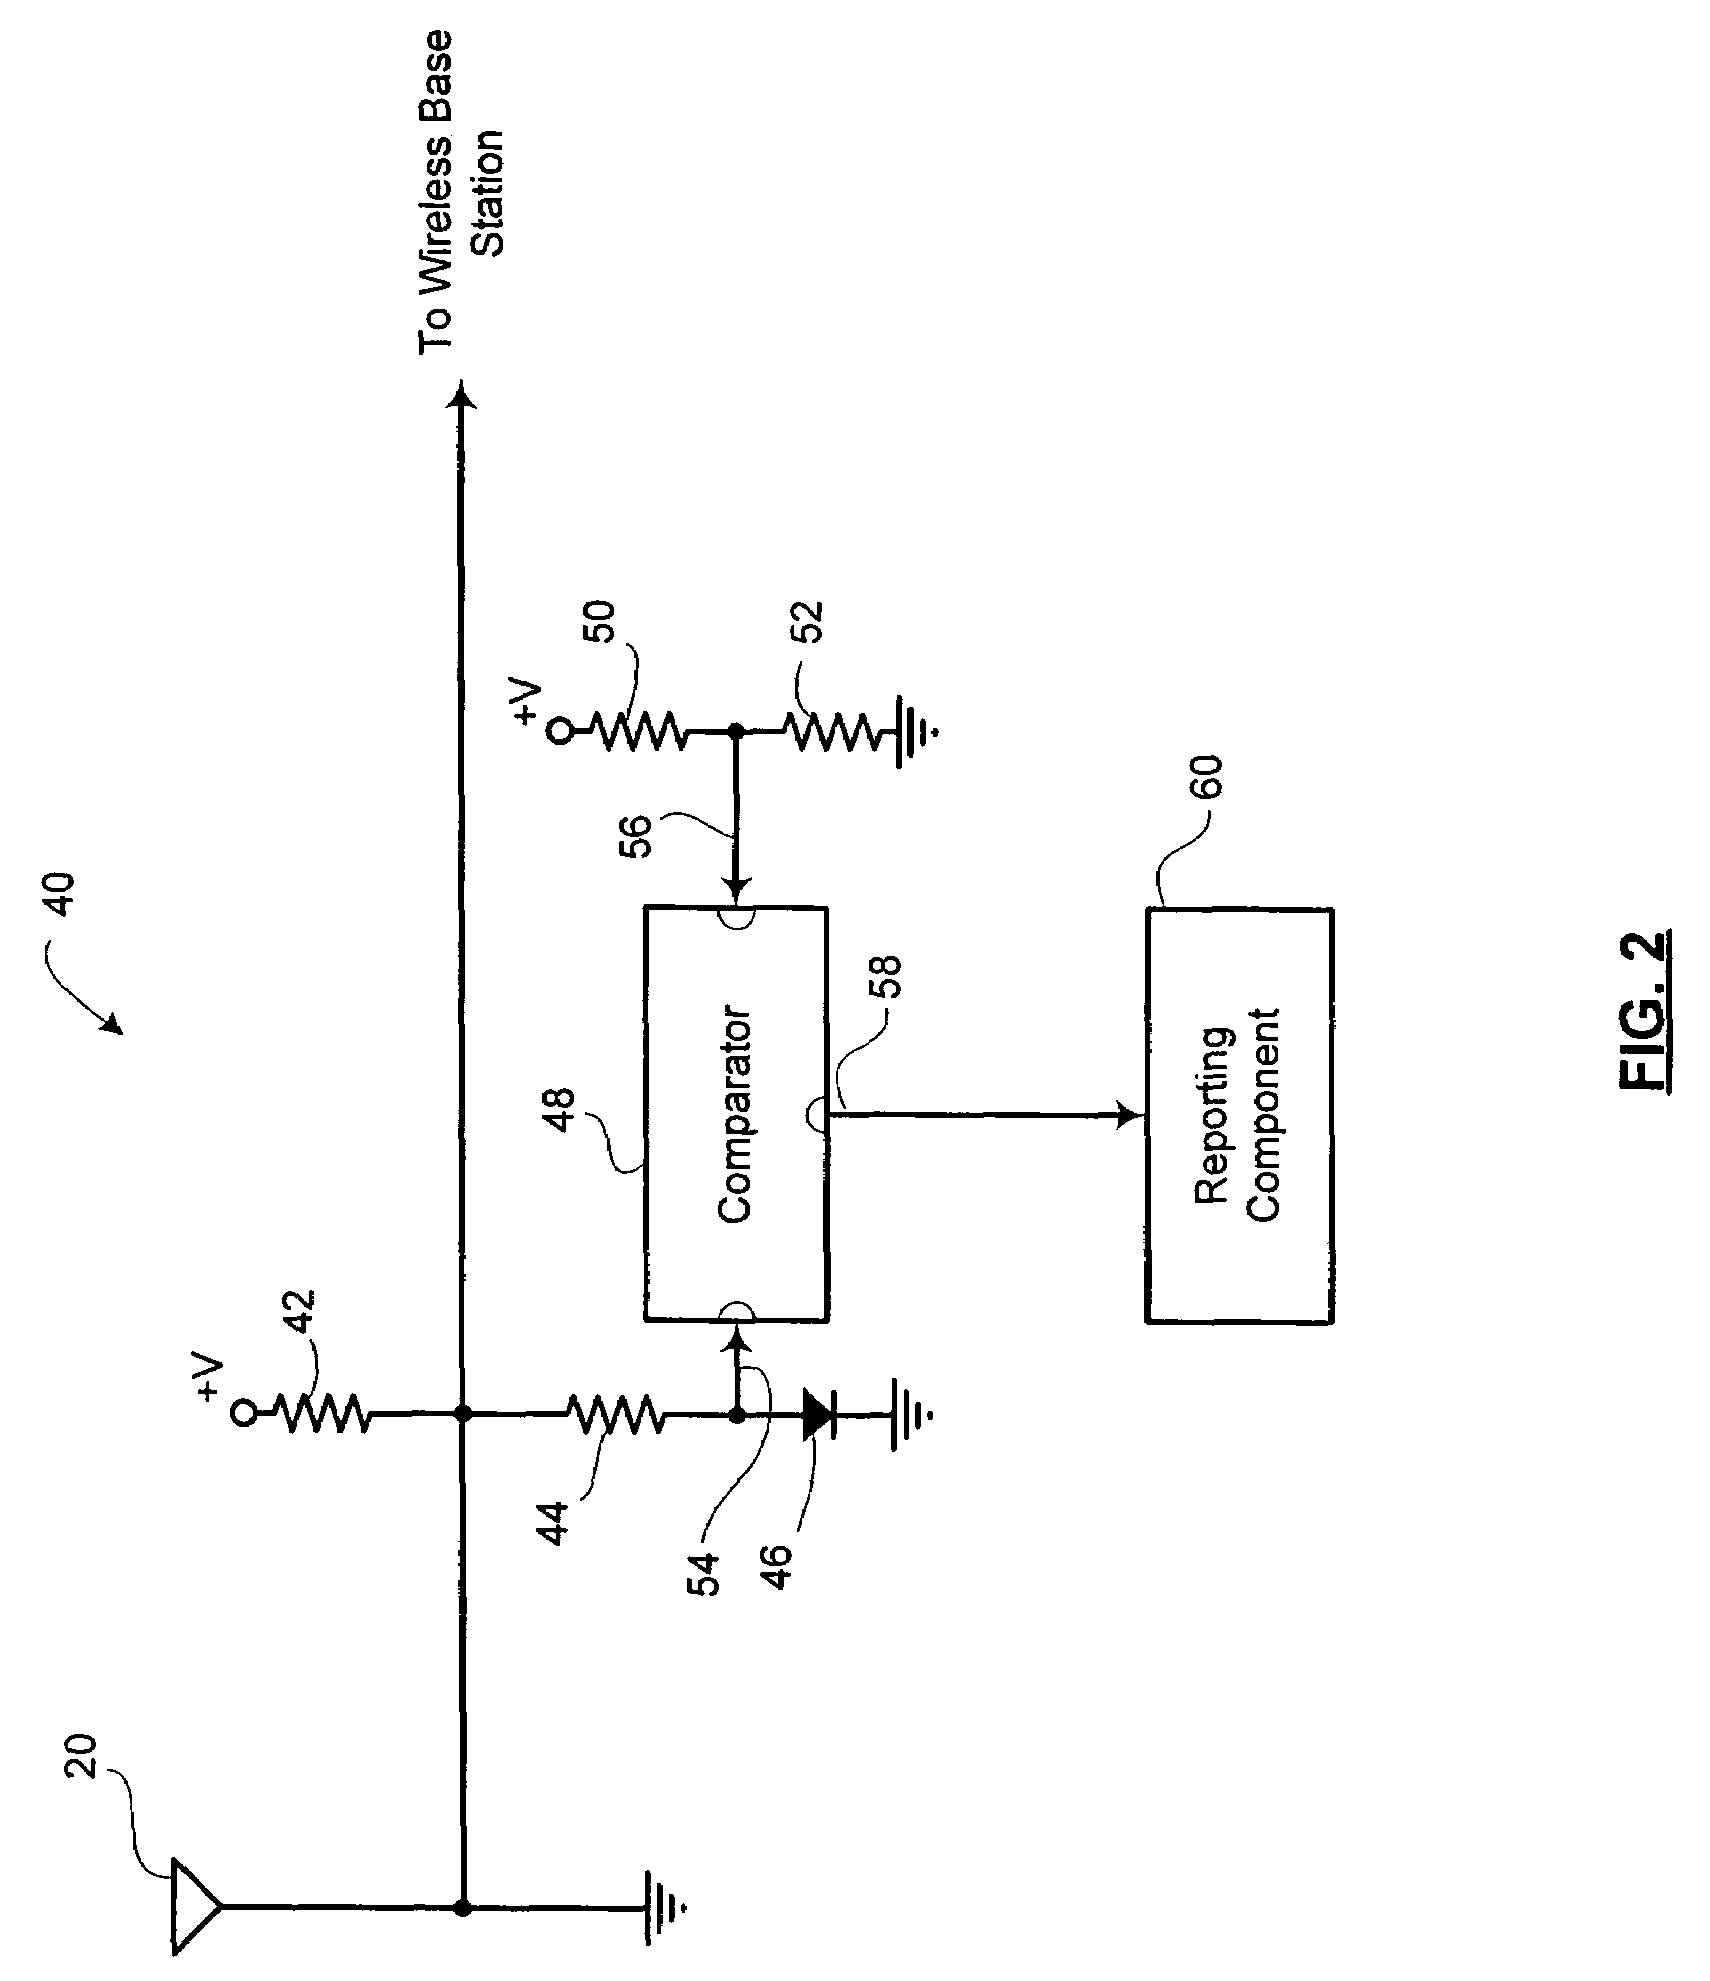 Fault monitoring in a distributed antenna system